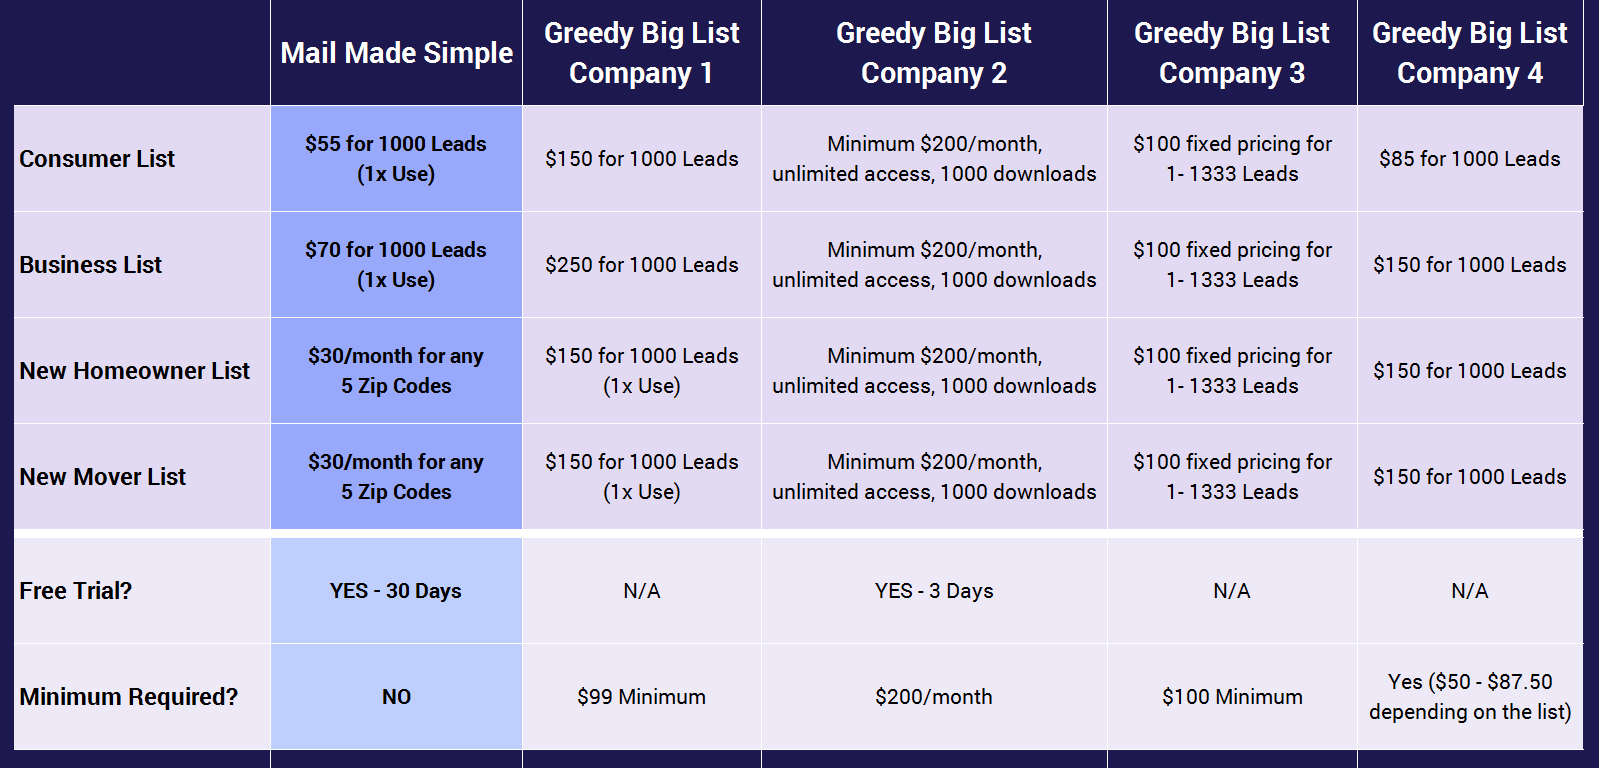 Compare prices -- you can save hundreds of dollars on mailing lists by using MailMadeSimple.com